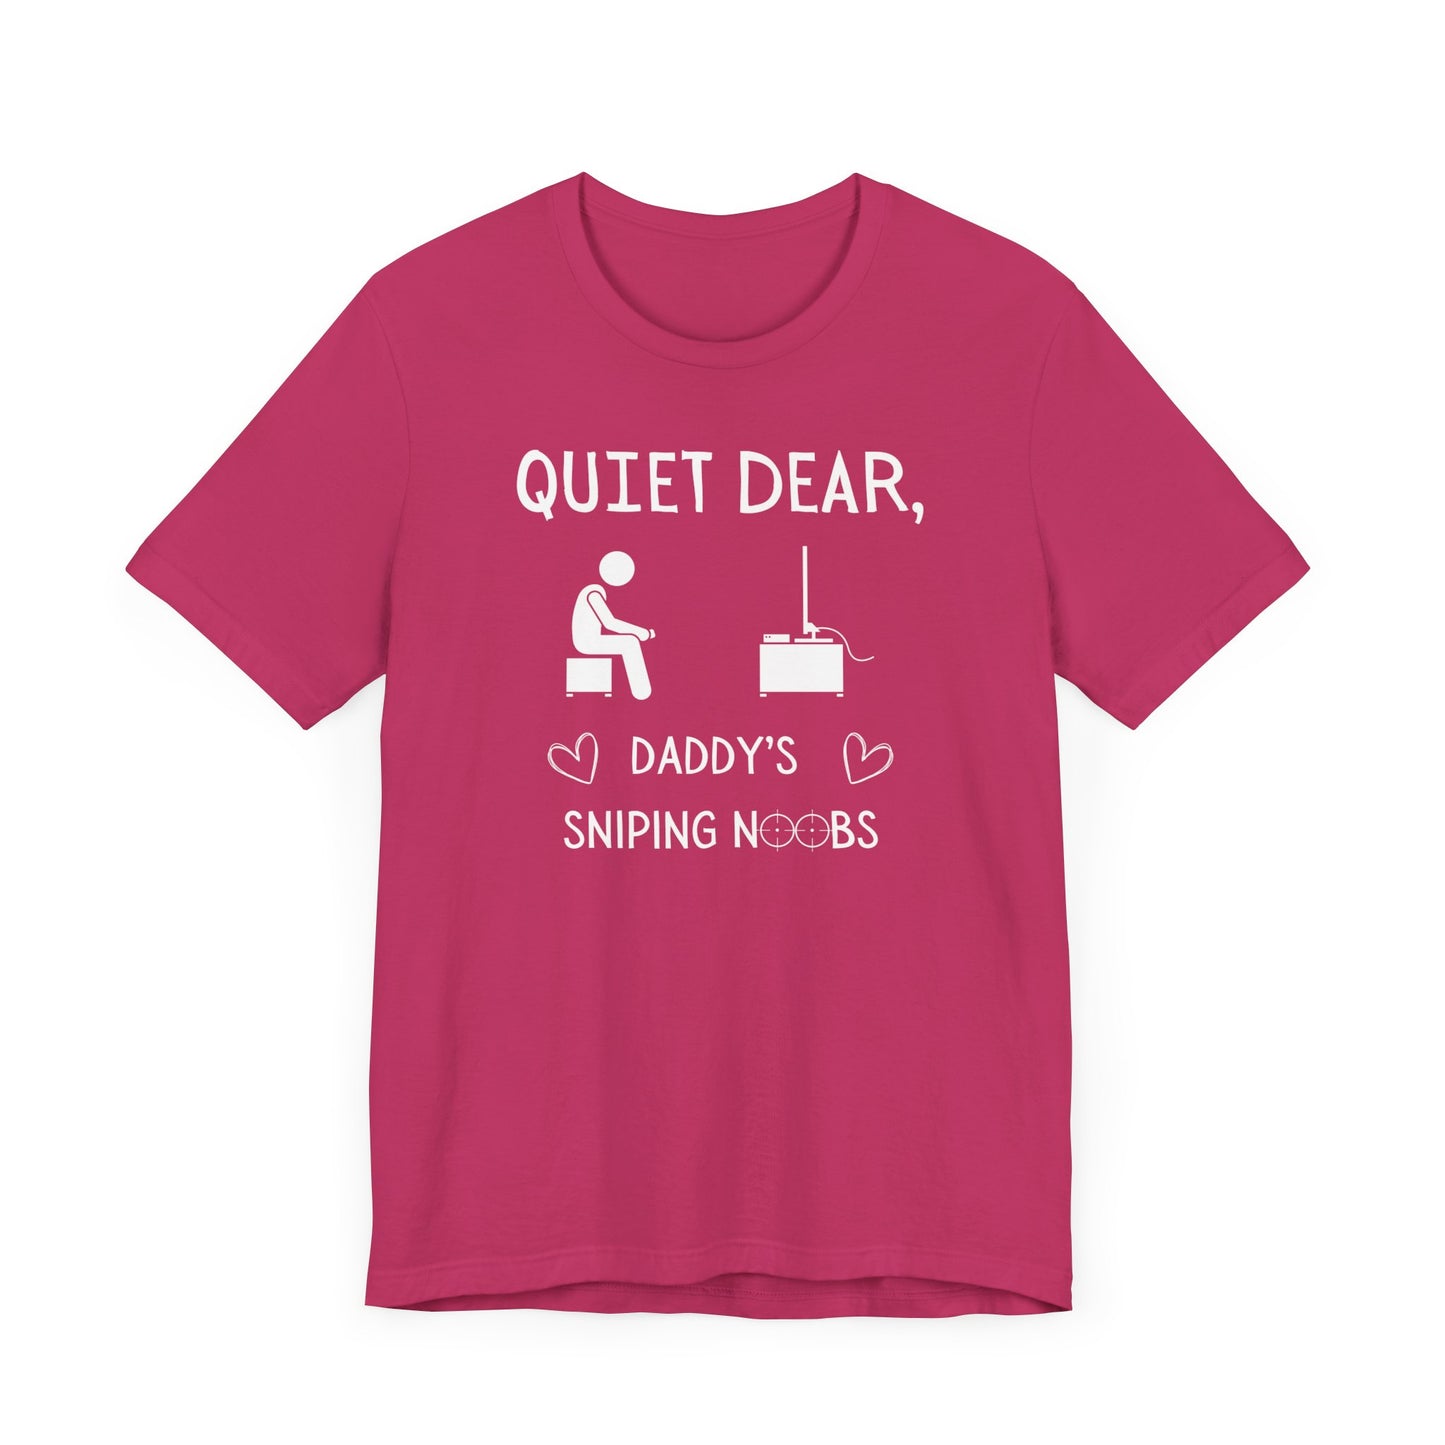 A flat image of a berry pink t-shirt that reads Quiet Dear, Daddy's Sniping Noobs in white text. The lower text is framed by two hearts, and the O's are in the shape of sniper scopes. In the center of the shirt is an image of a person holding a controller sitting across from a TV.